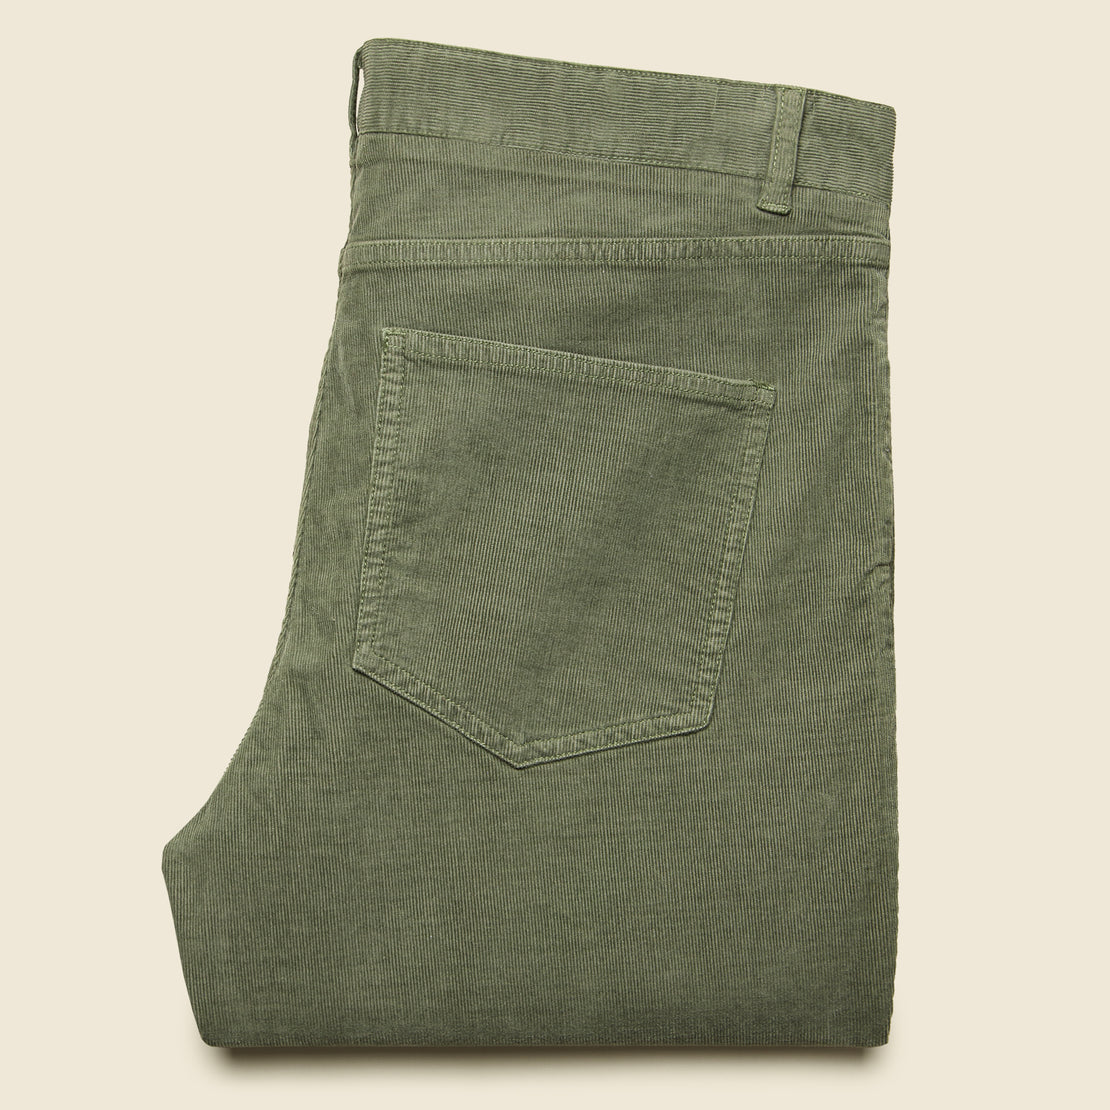 Stretch Corduroy Pant - Washed Olive - Faherty - STAG Provisions - Pants - Corduroy